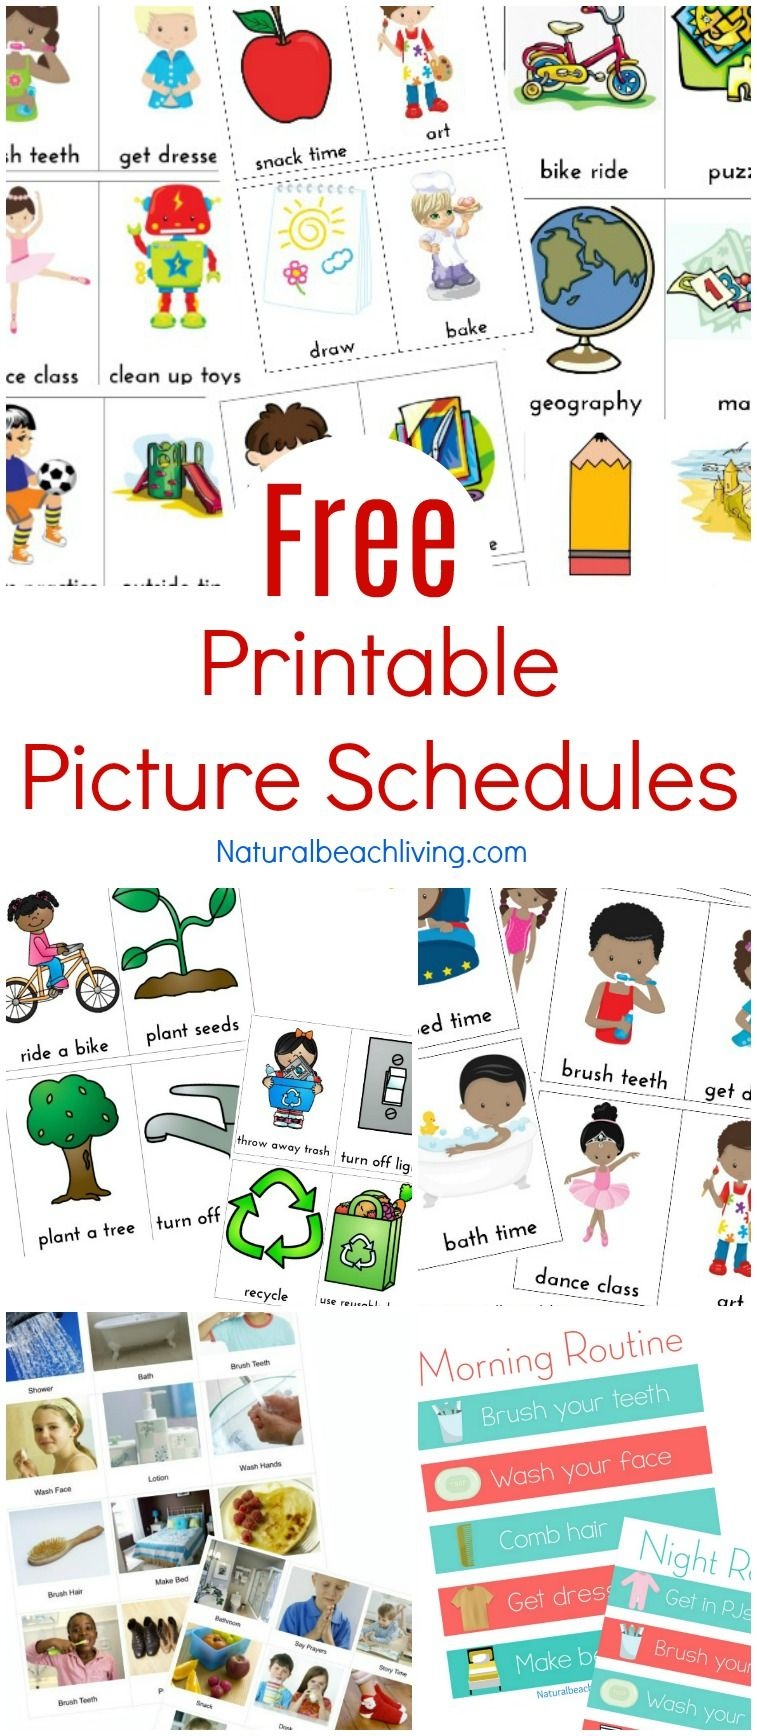 Free Printable Picture Schedule Cards - Visual Schedule Printables - Free Printable Picture Schedule Cards